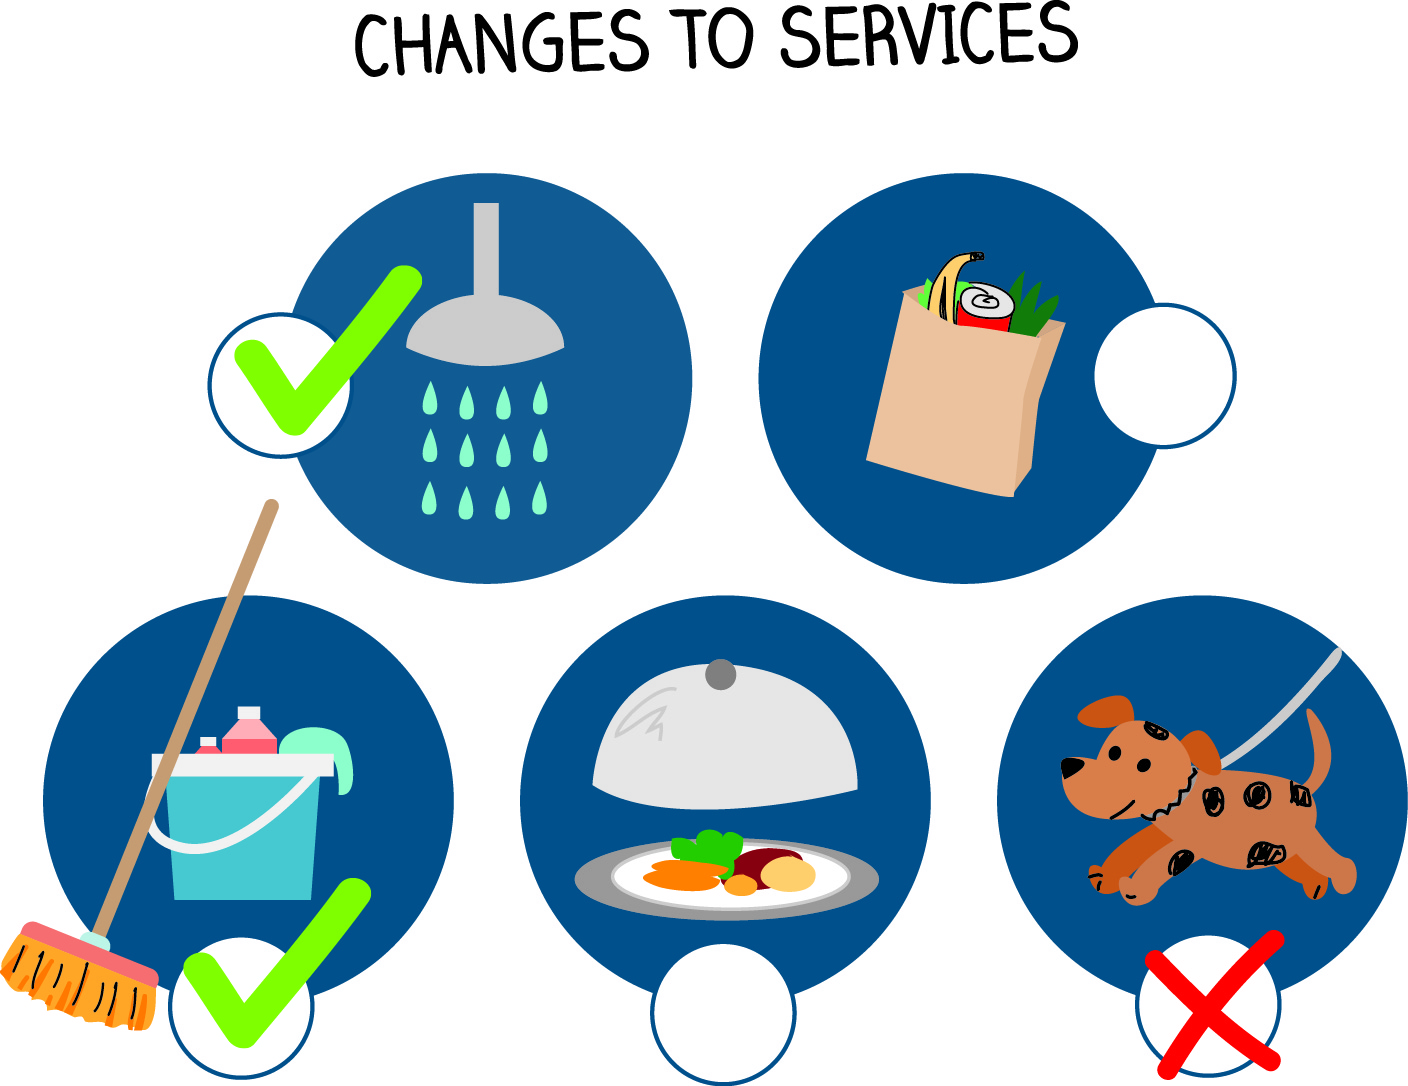 Changes to services